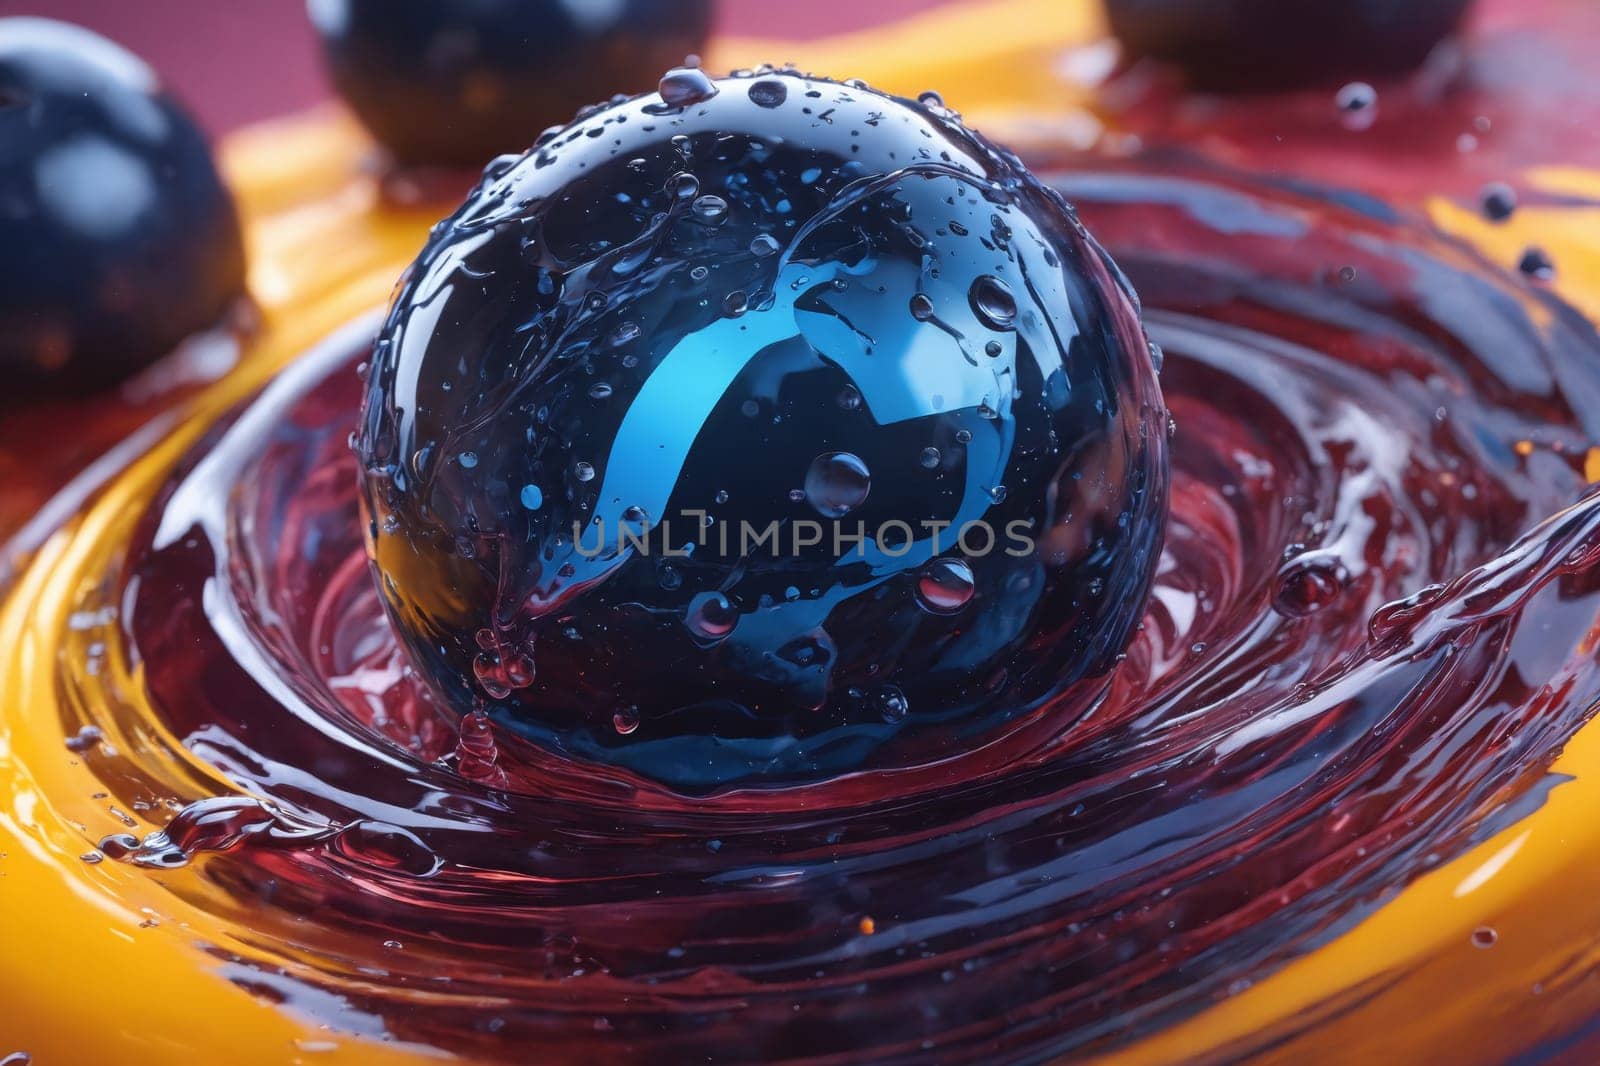 The elegance of a blue ball with delicate water droplets, set against a colorful splash backdrop.